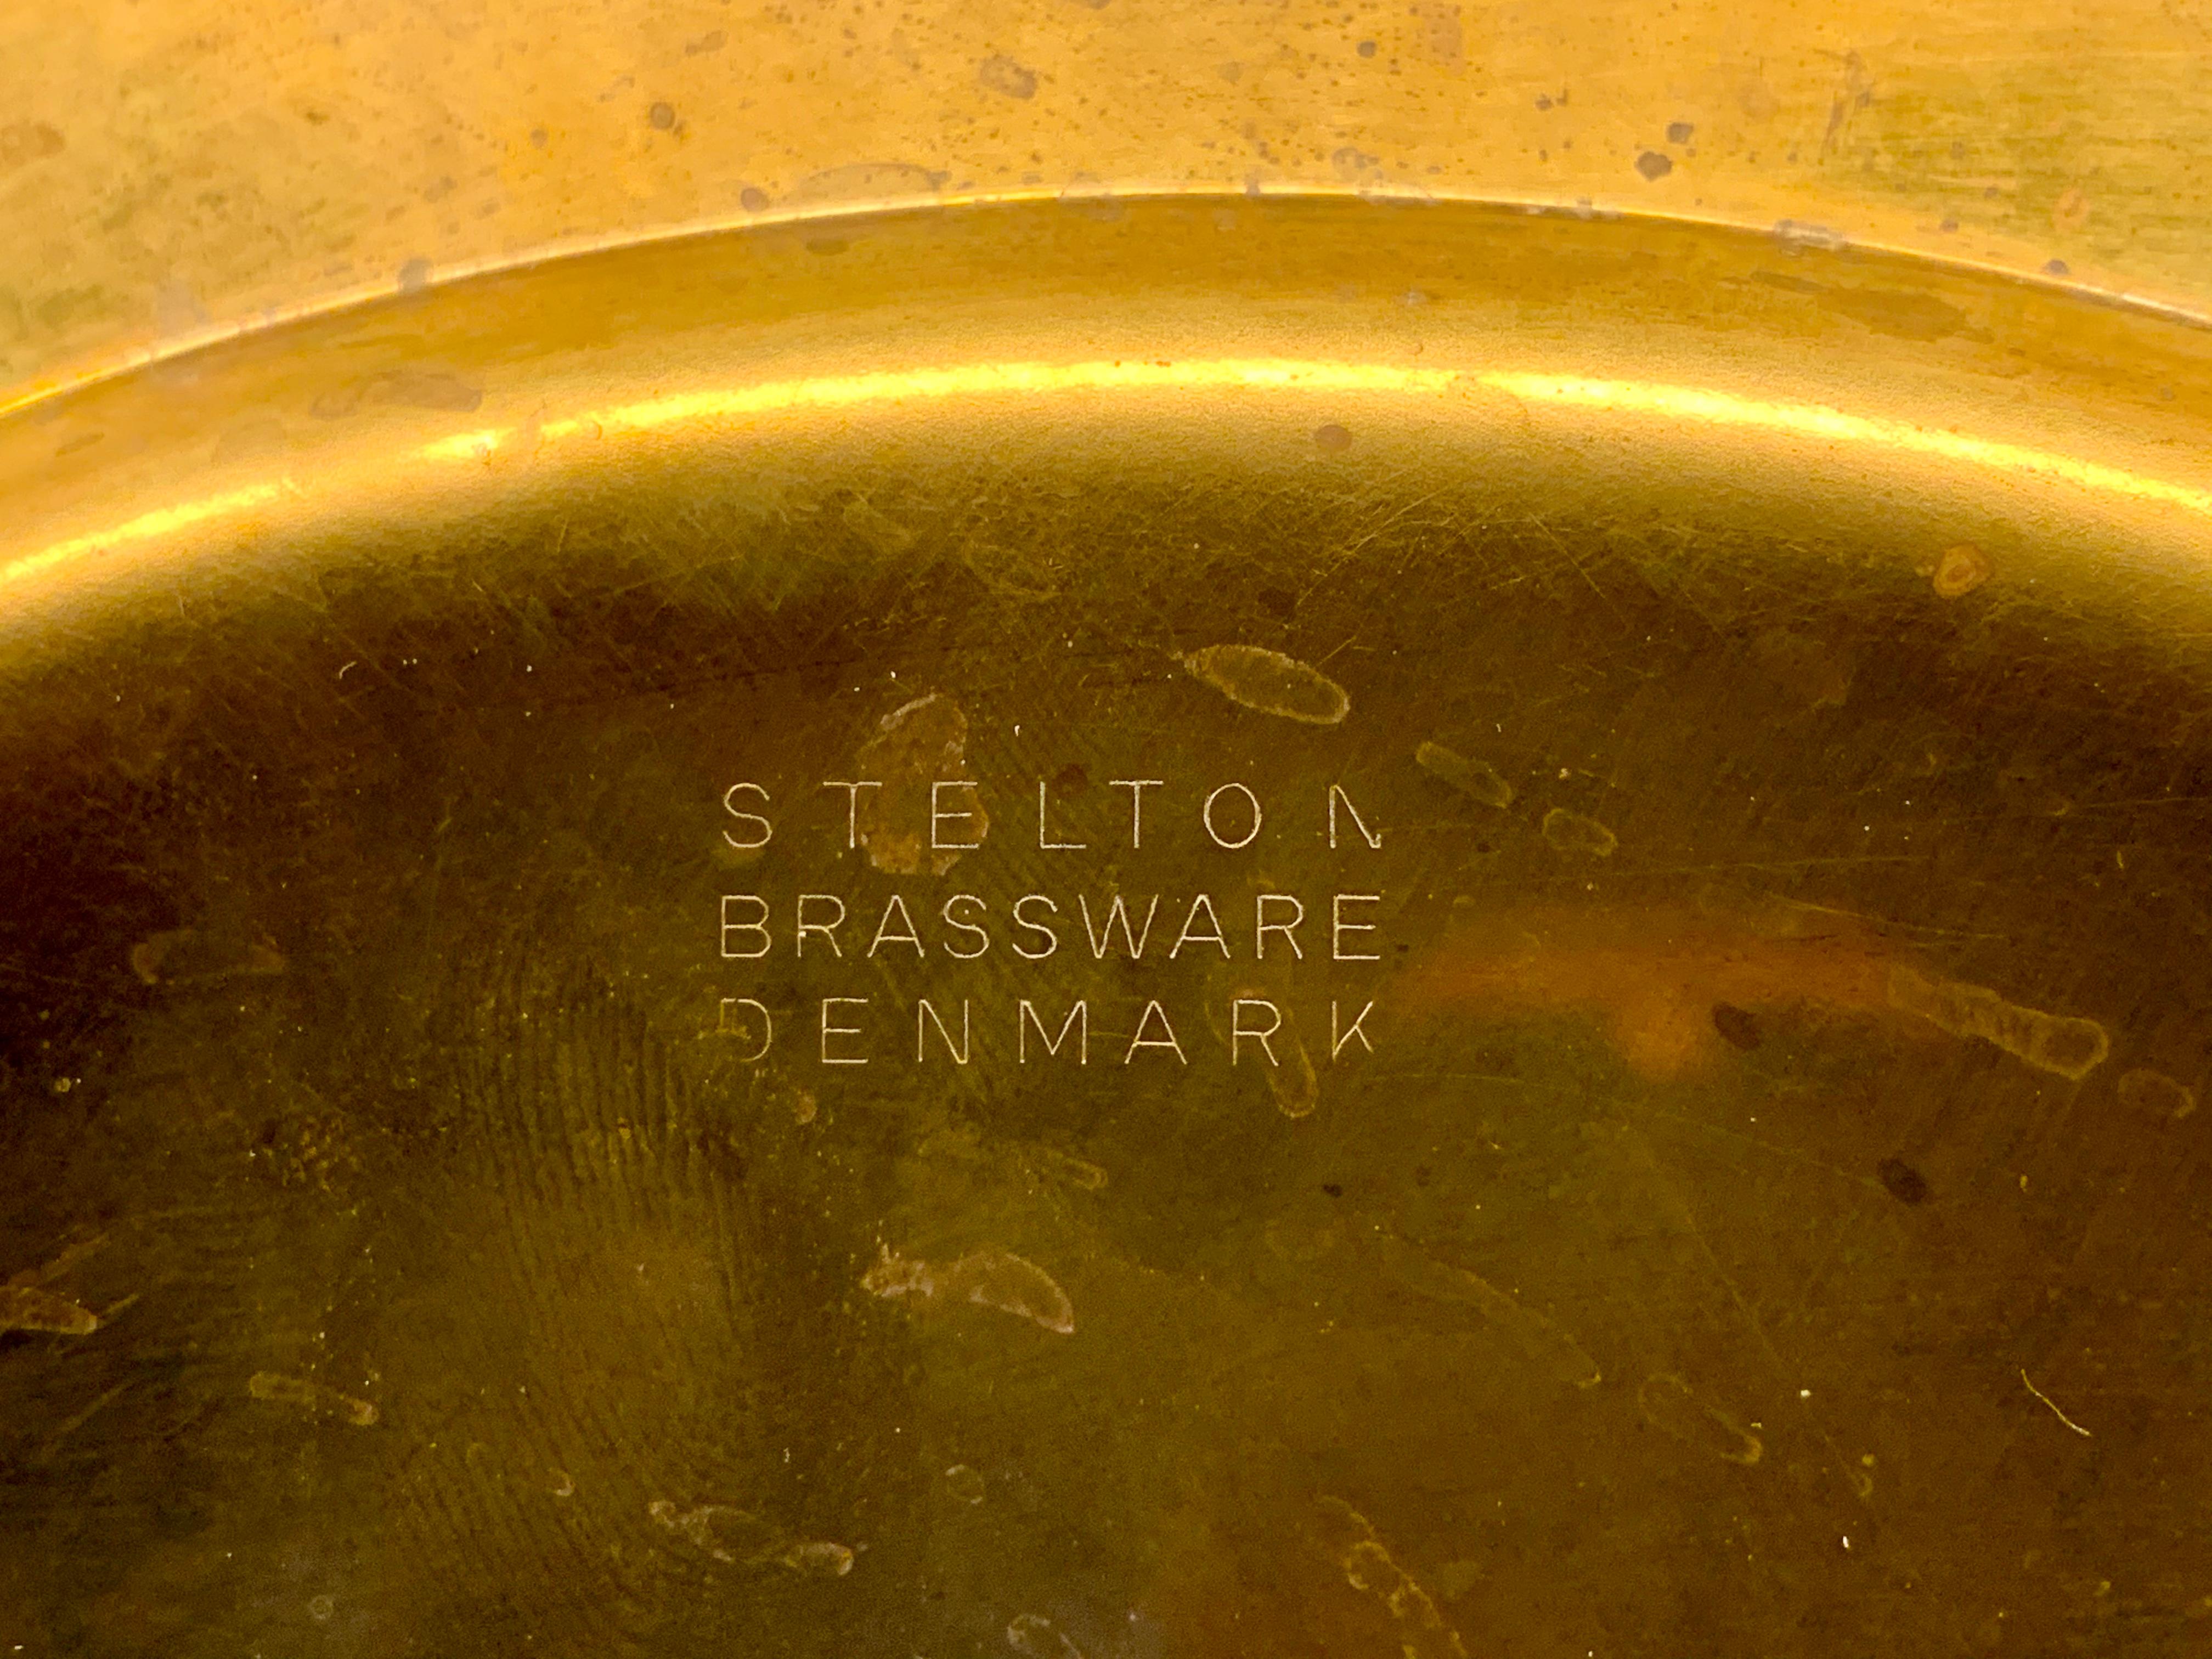 Set of ten coaster dining brass plates produced in mid-Century by Stelton in Denmark.